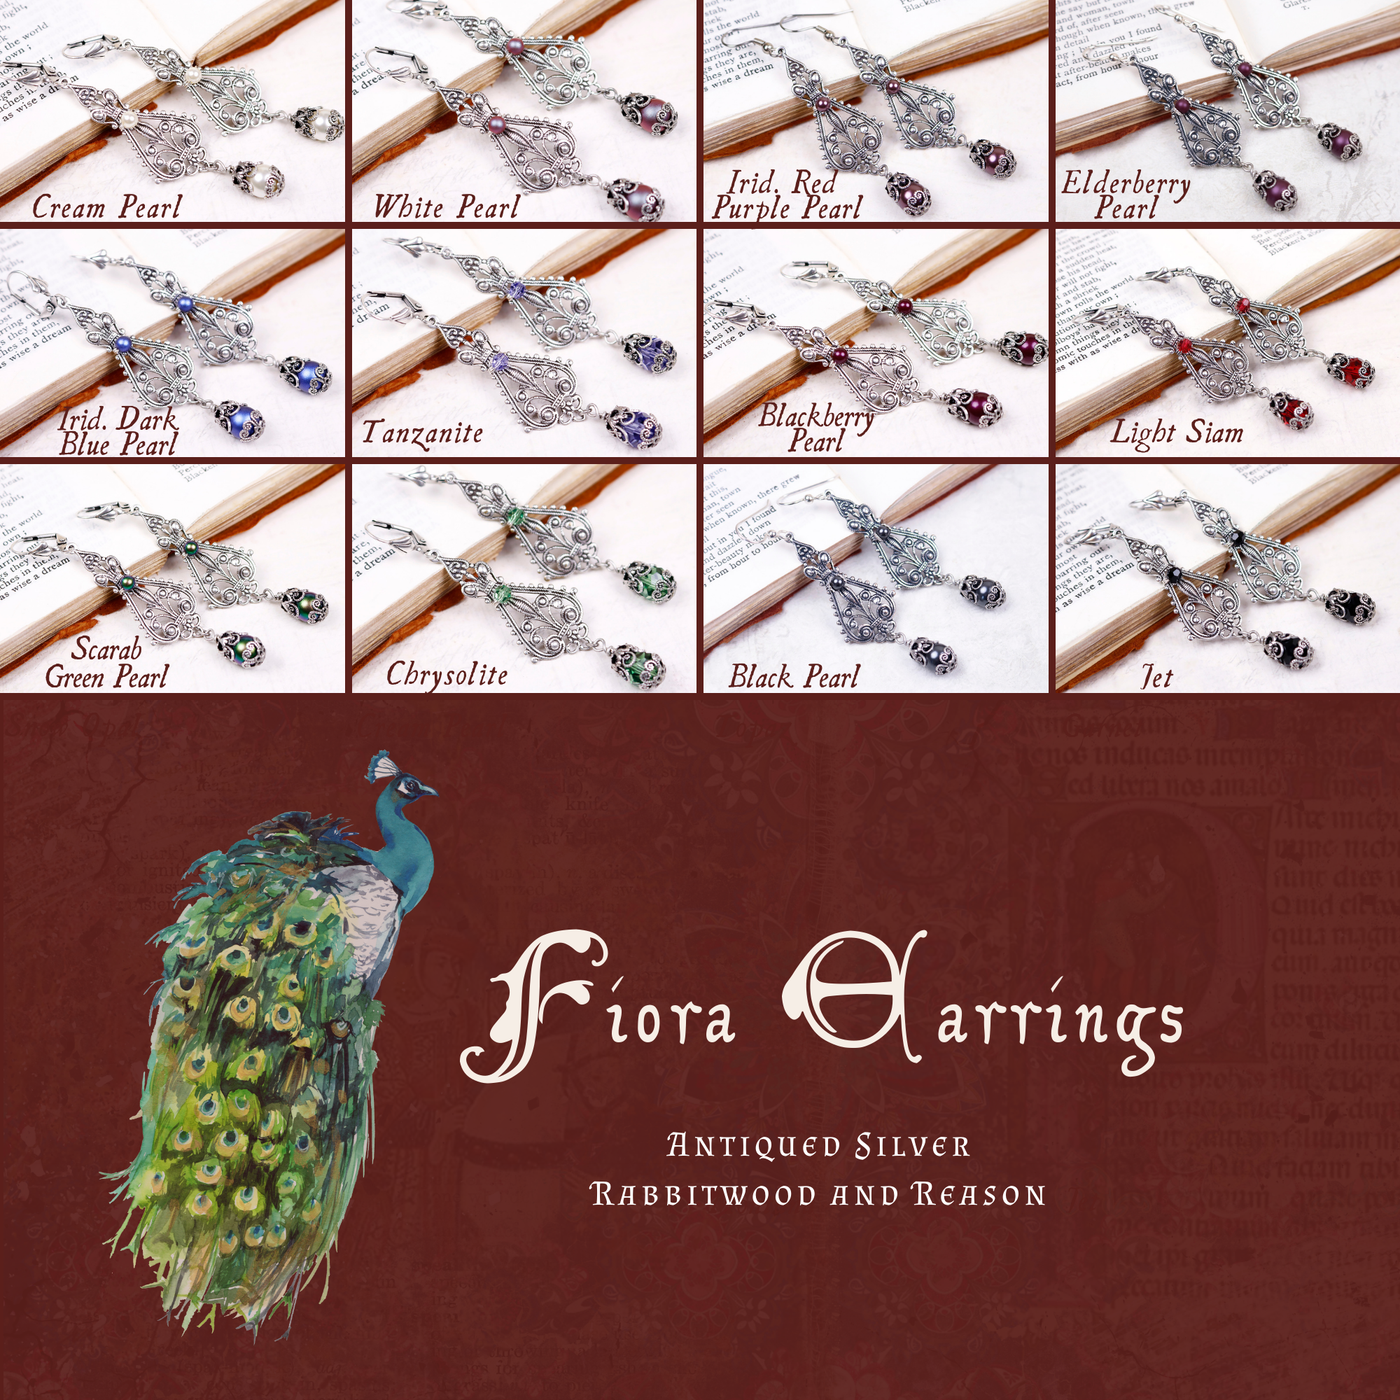 Group Pic: Fiora Earrings in Antiqued Silver by Rabbitwood and Reason